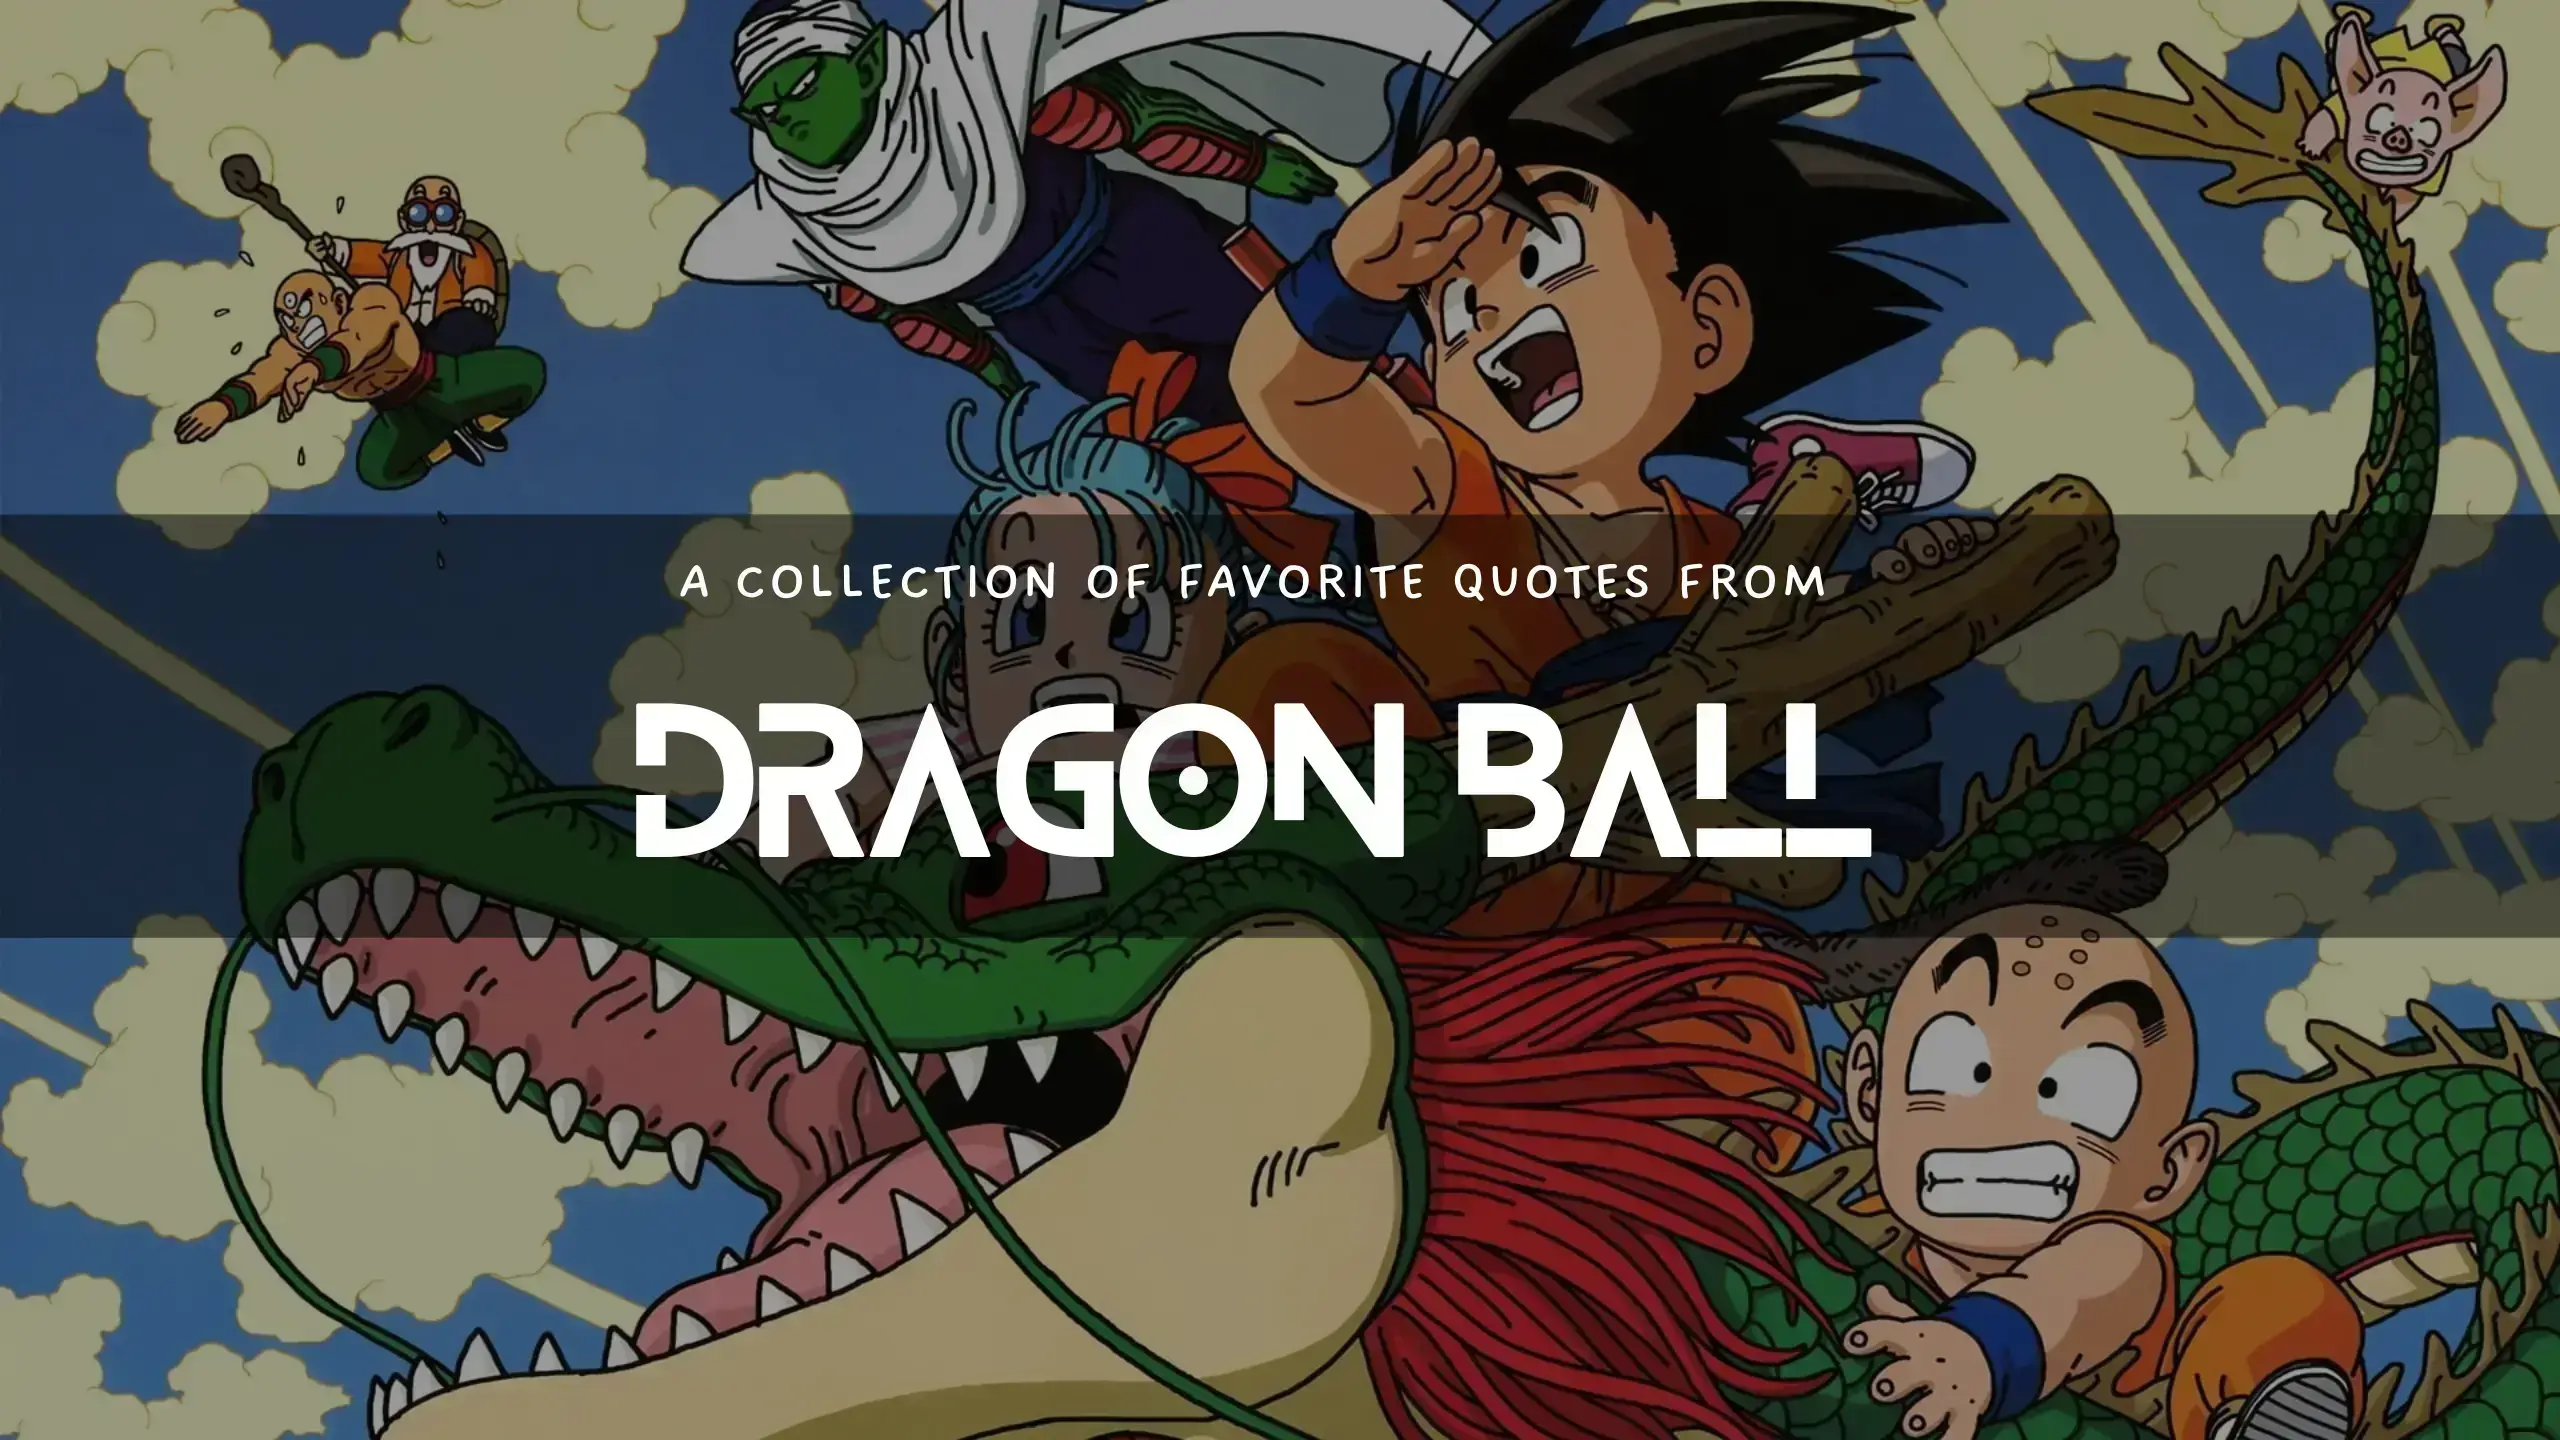 Awesome quotes from the Dragon Ball Z Anime